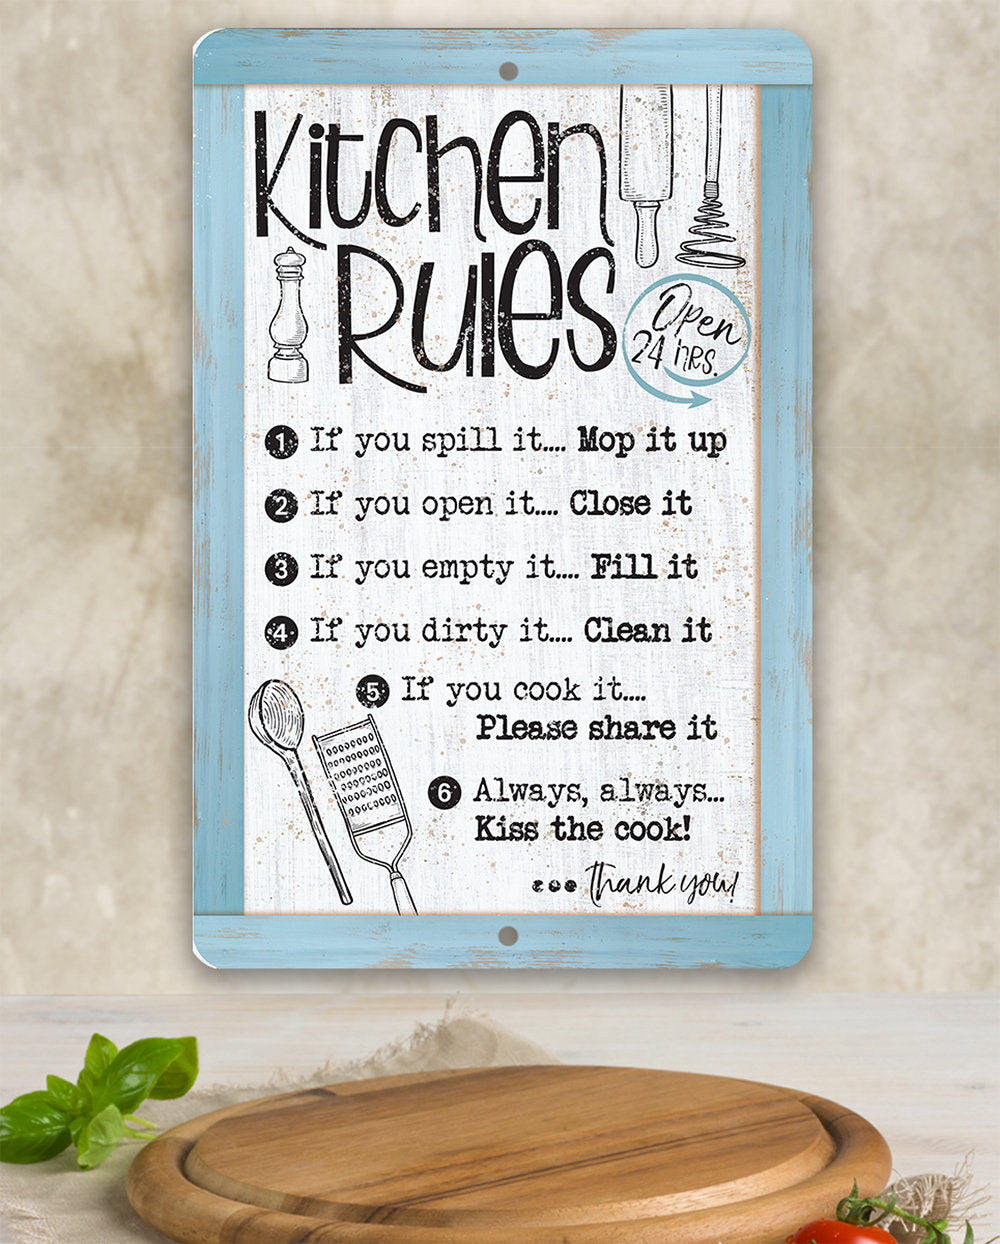 Kitchen Rules, Open 24 Hrs. - Metal Sign Metal Sign Lone Star Art 